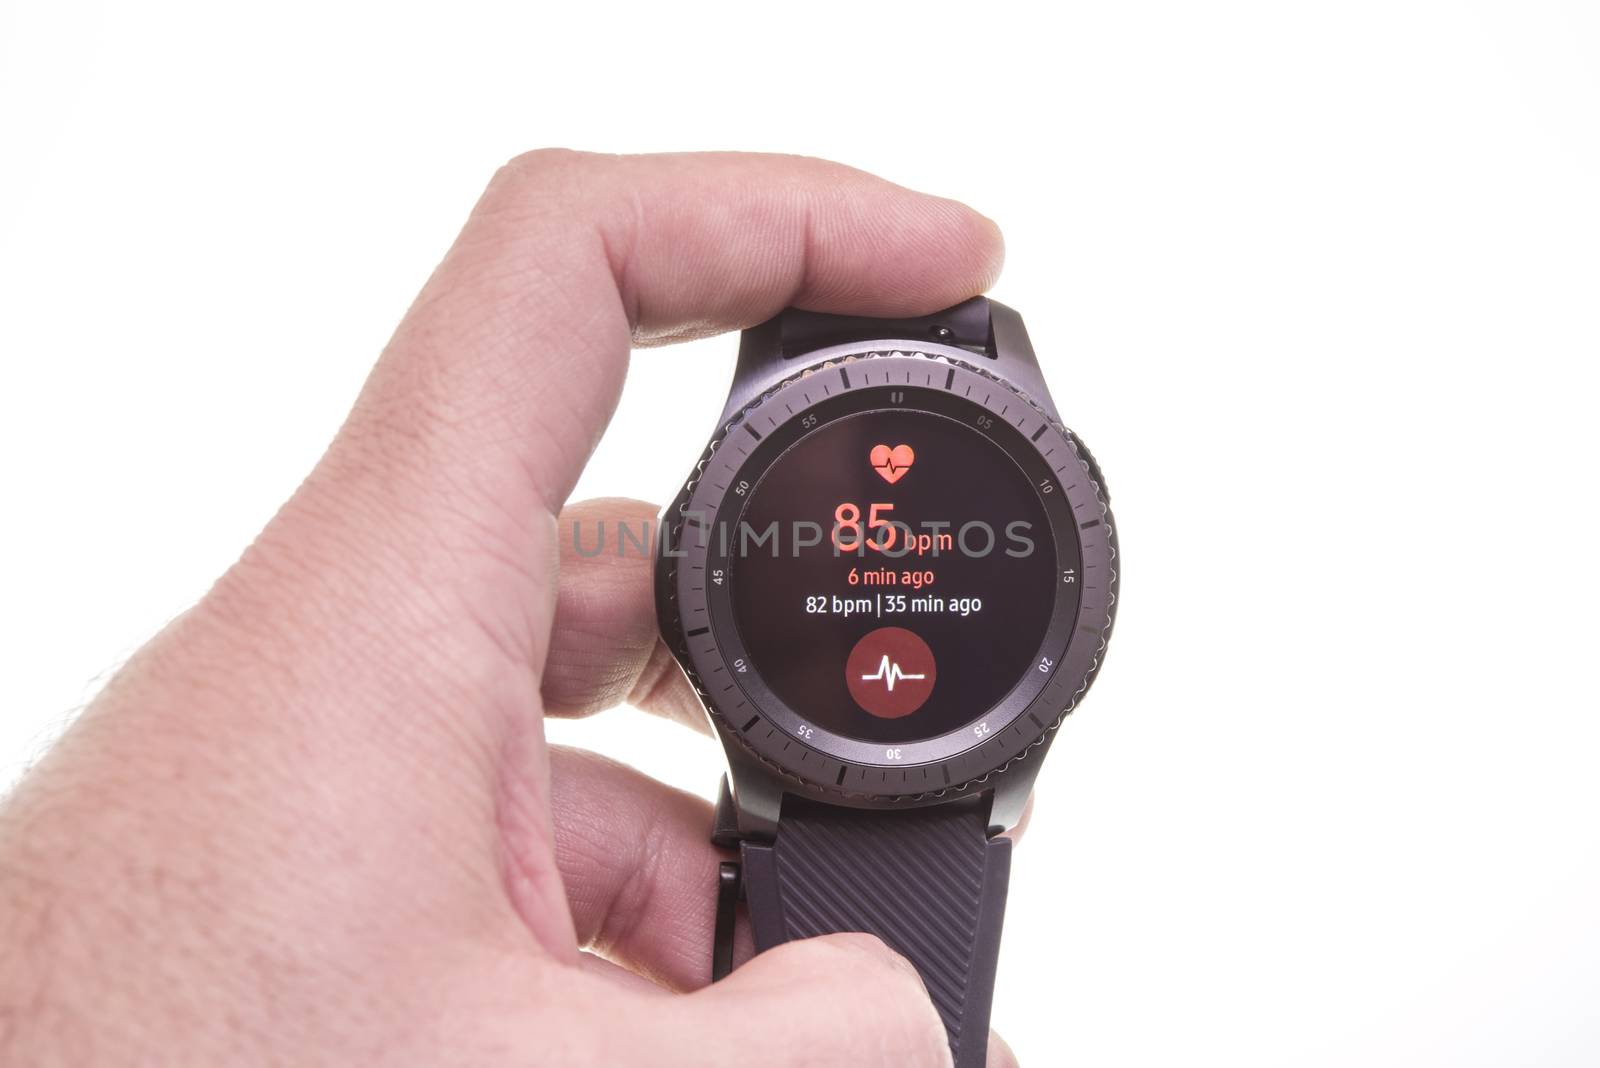 Heart rate monitor on smart watch display